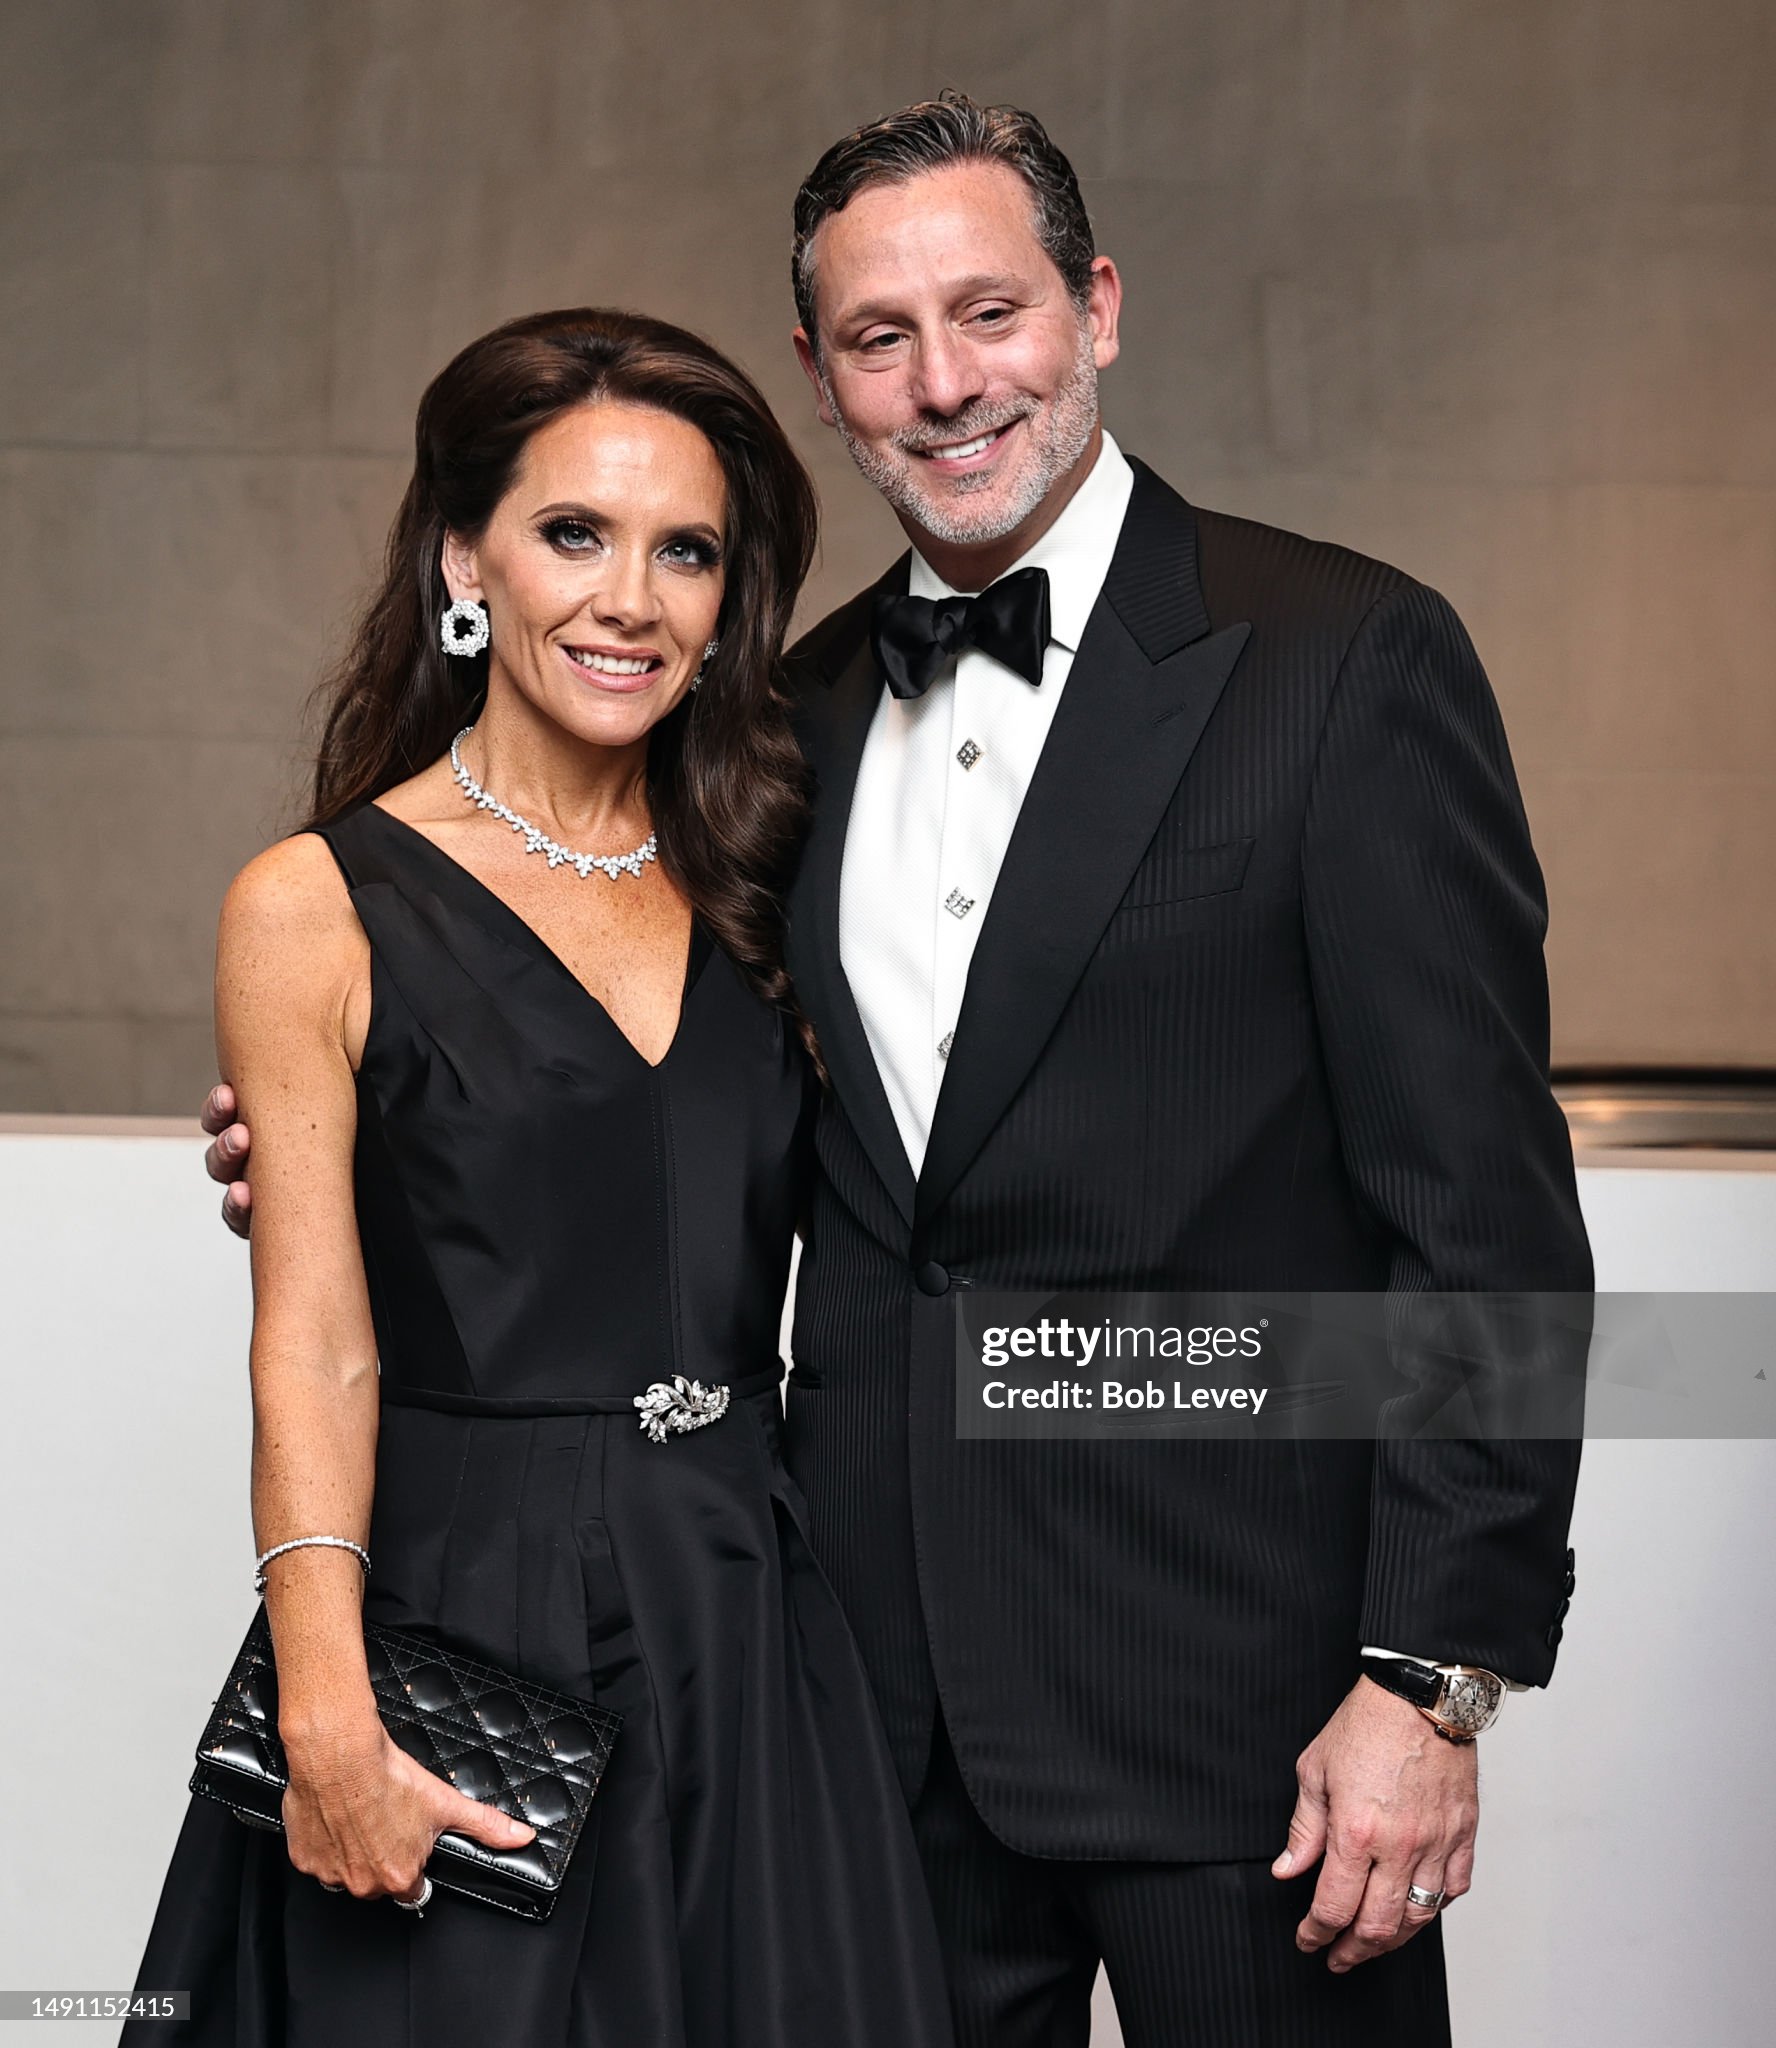 joanna-marks-and-brad-marks-attend-the-sophia-awards-for-excellence-presentation-at-museum-of.jpg